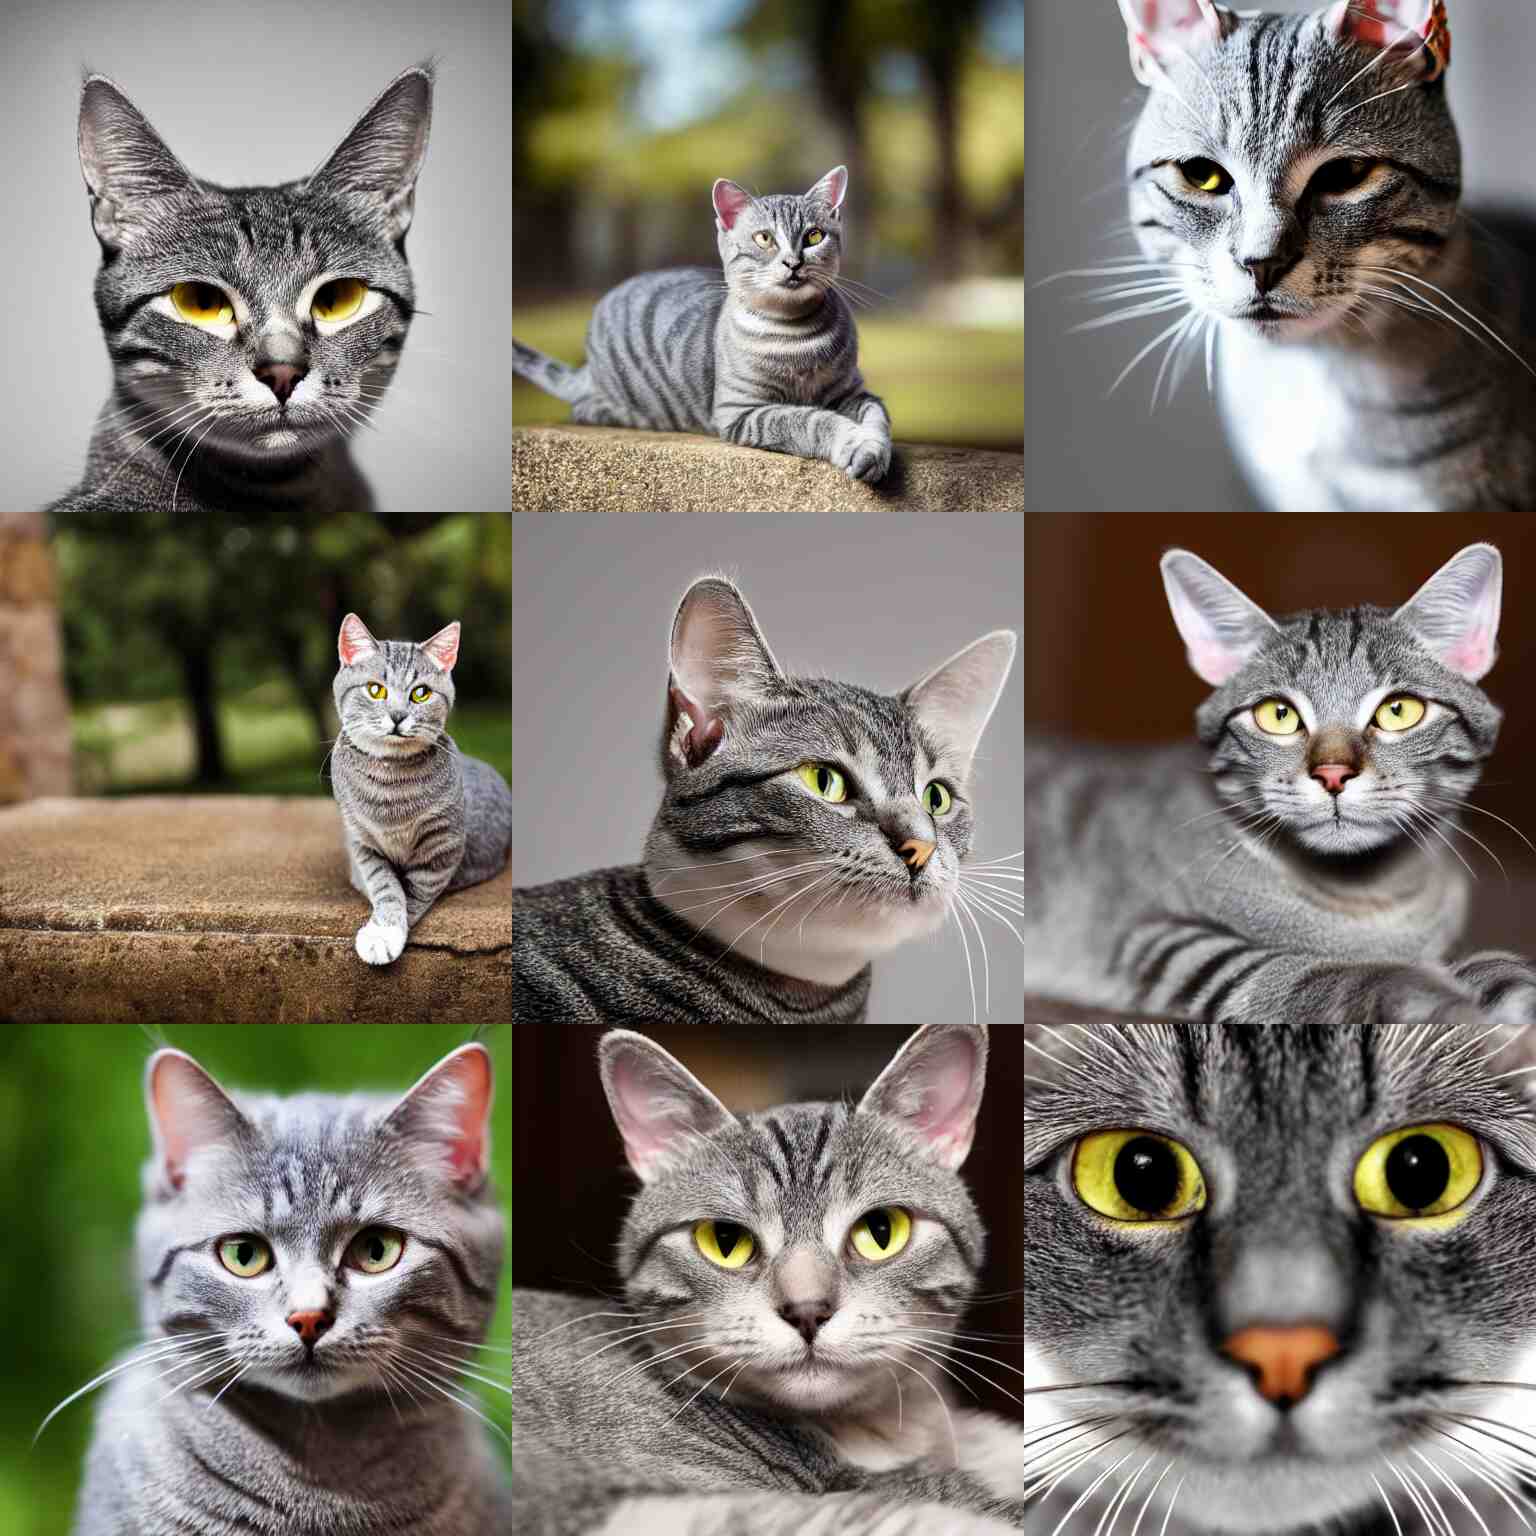 How To Classify Photos Of Cats By Breed Using This Recognition API